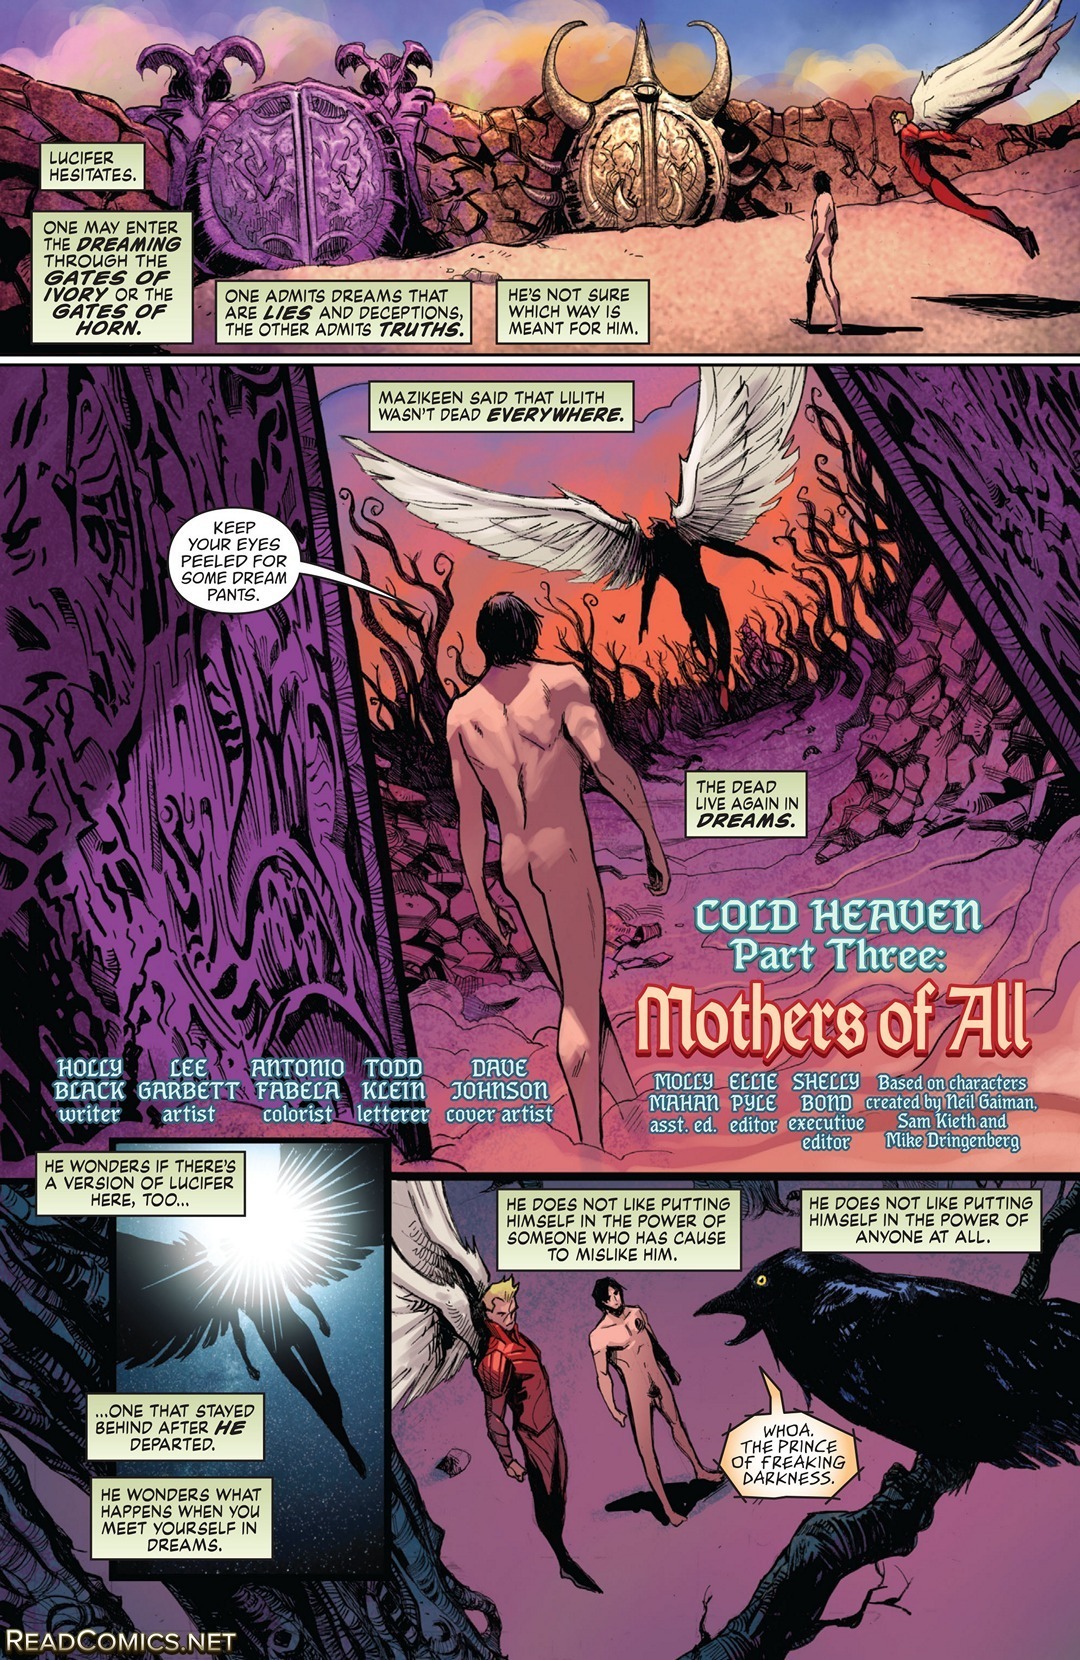 Lucifer (2015-): Chapter 3 - Page 3